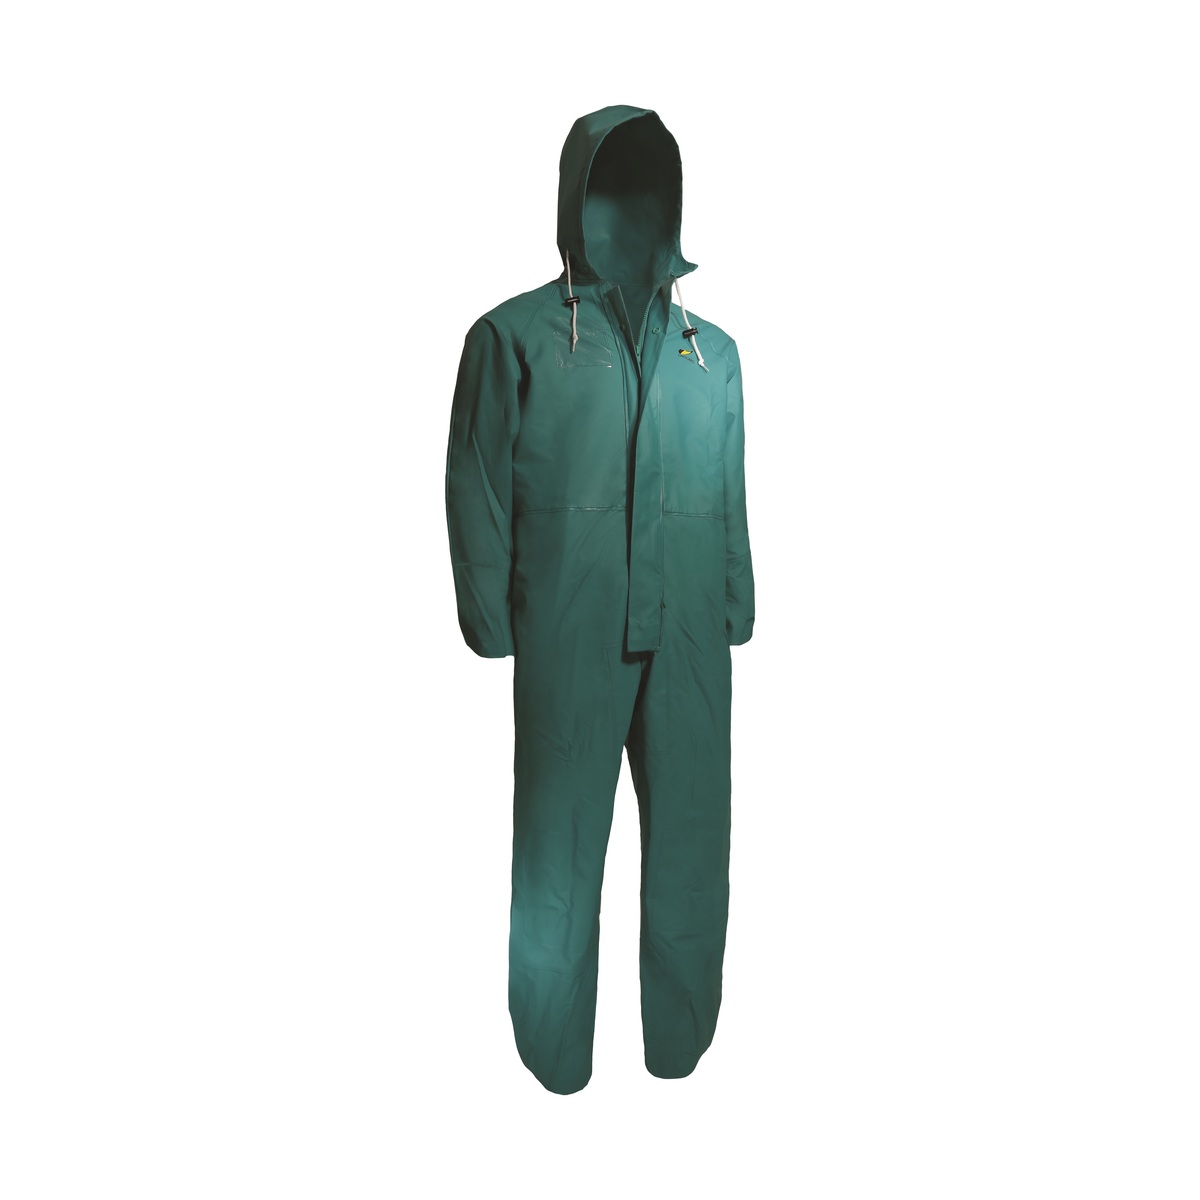 Dunlop® Protective Footwear 2X Green Chemtex .42 mm Polyester/PVC/Nylon Coveralls With Attached Hood